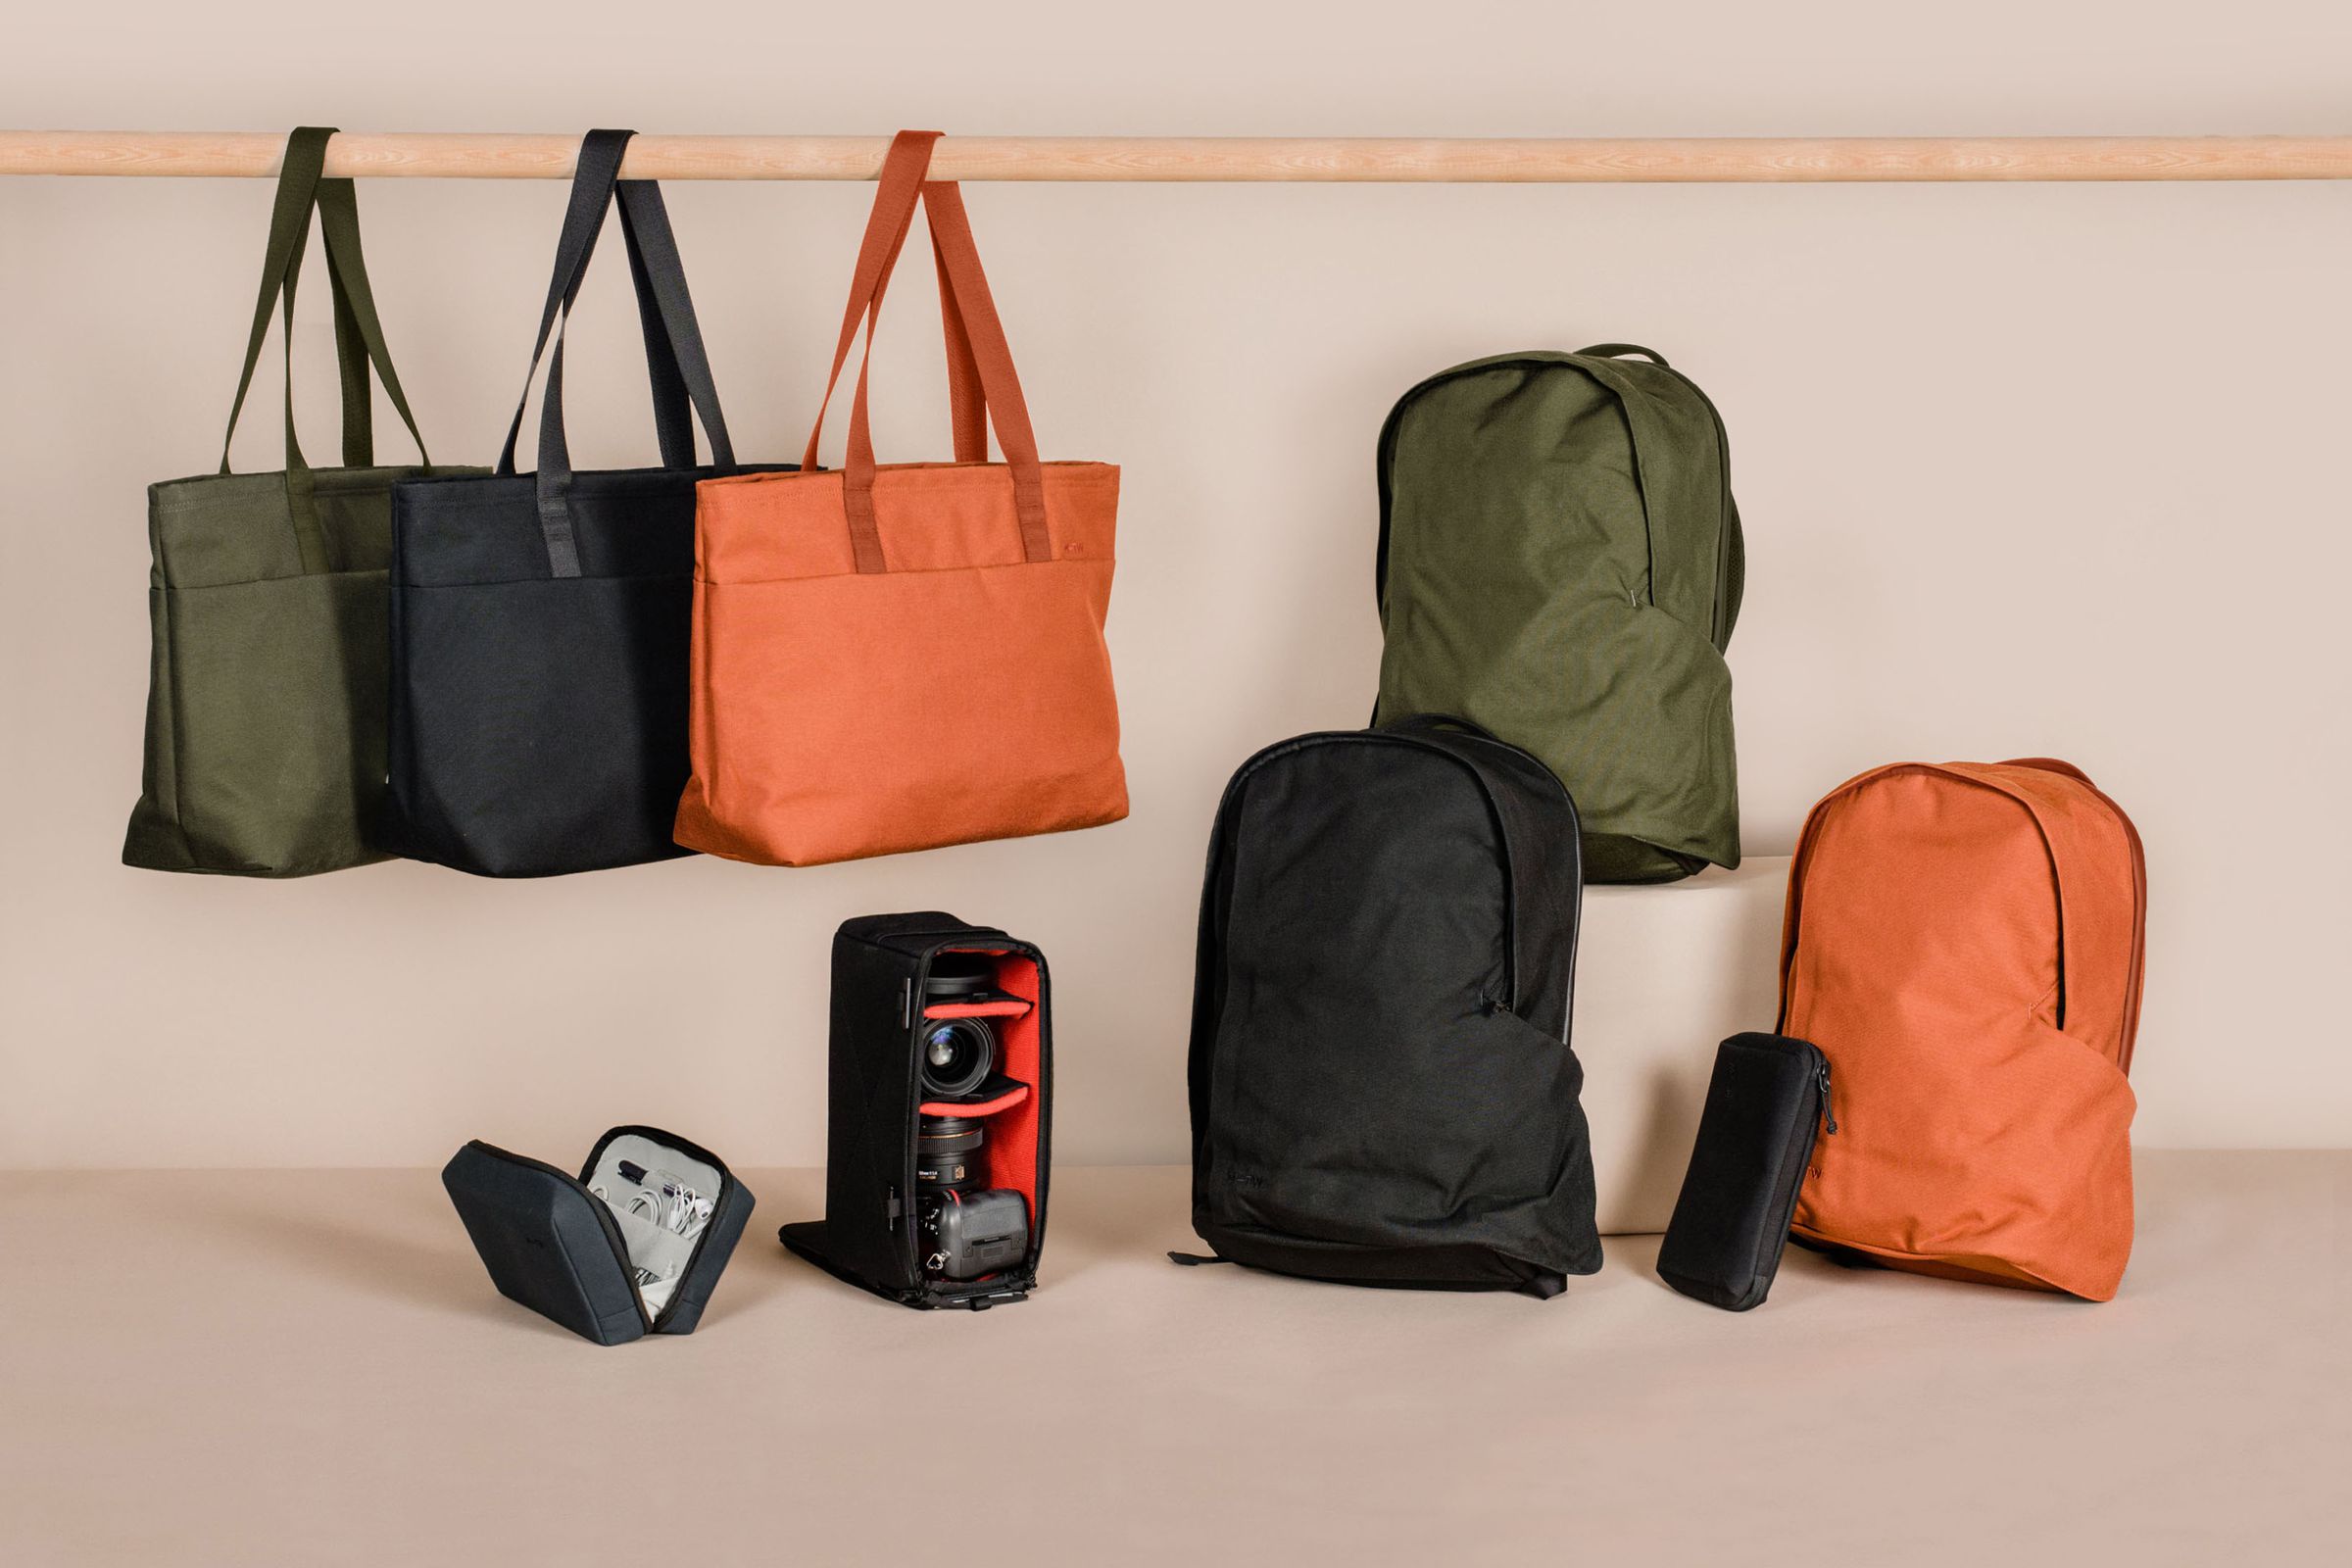 Moment’s new line of Travelwear bags.